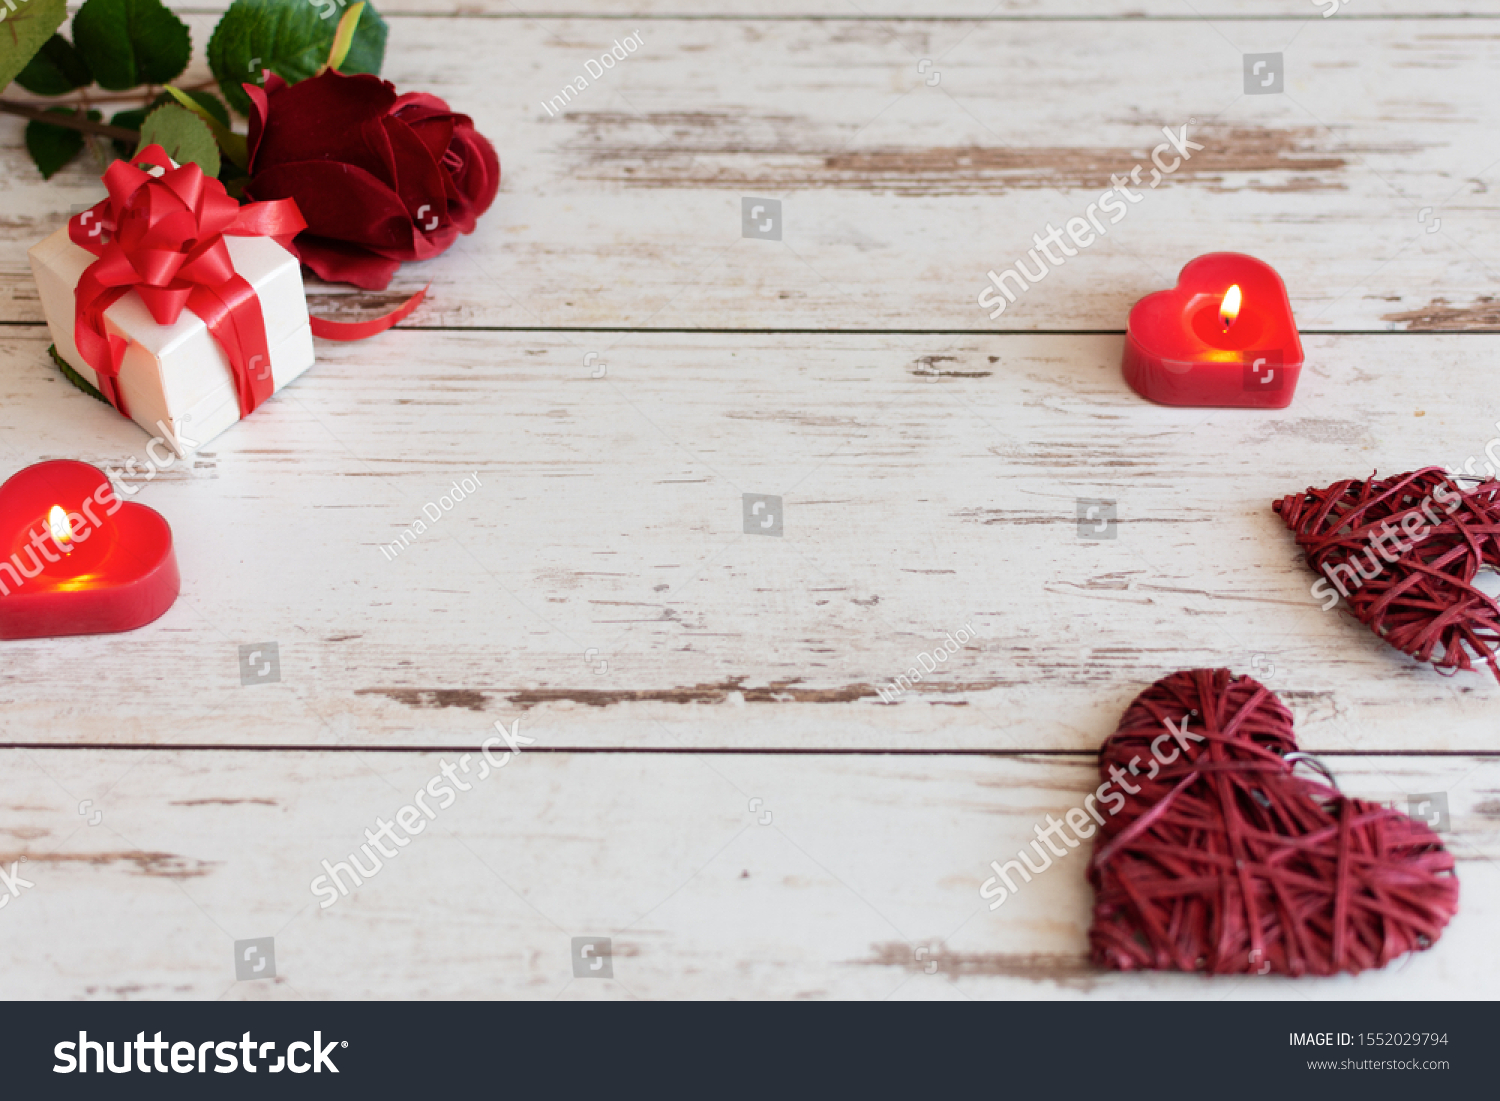 Red roses with hearts and candles on wooden background. St. Valentines Day or Wedding card concept with copy space for your text. #1552029794